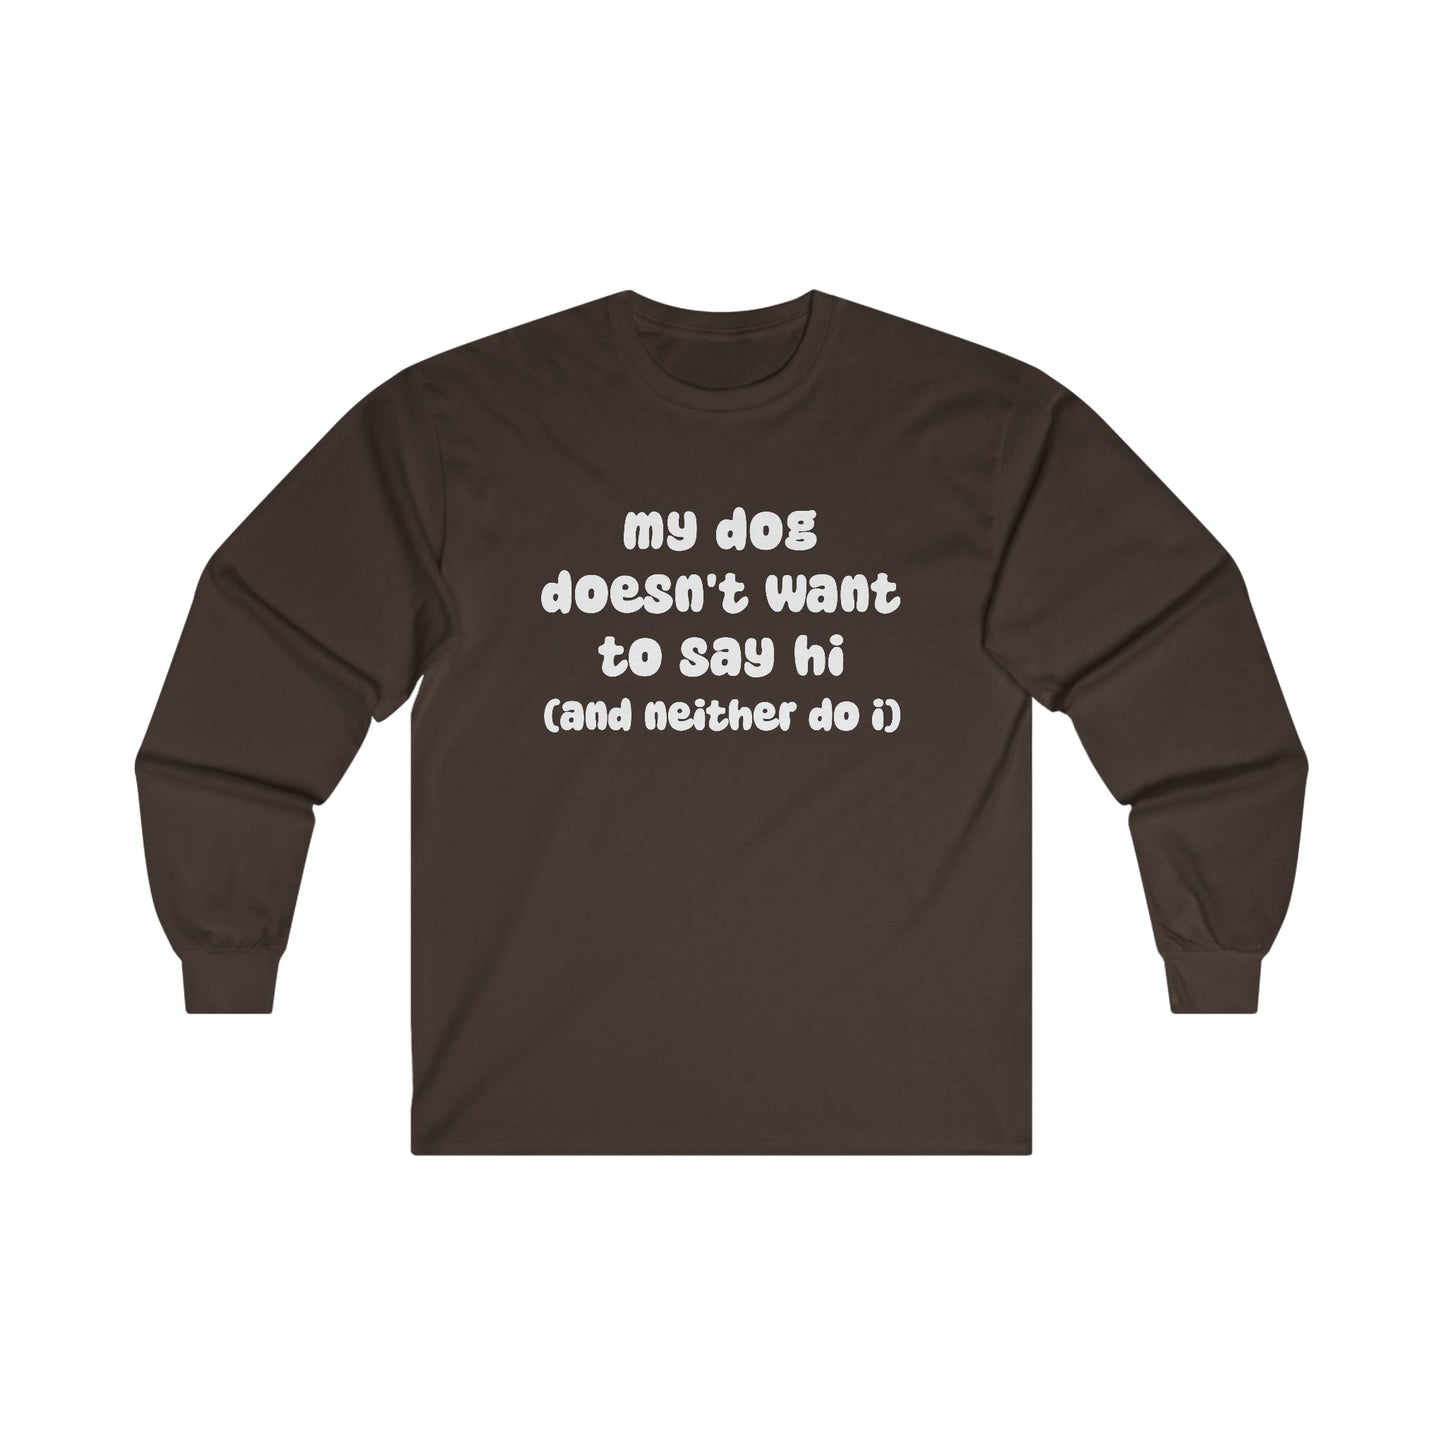 My Dog Doesn't Want To Say Hi (And Neither Do I) | Long Sleeve Tee - Detezi Designs-13182242754777940129